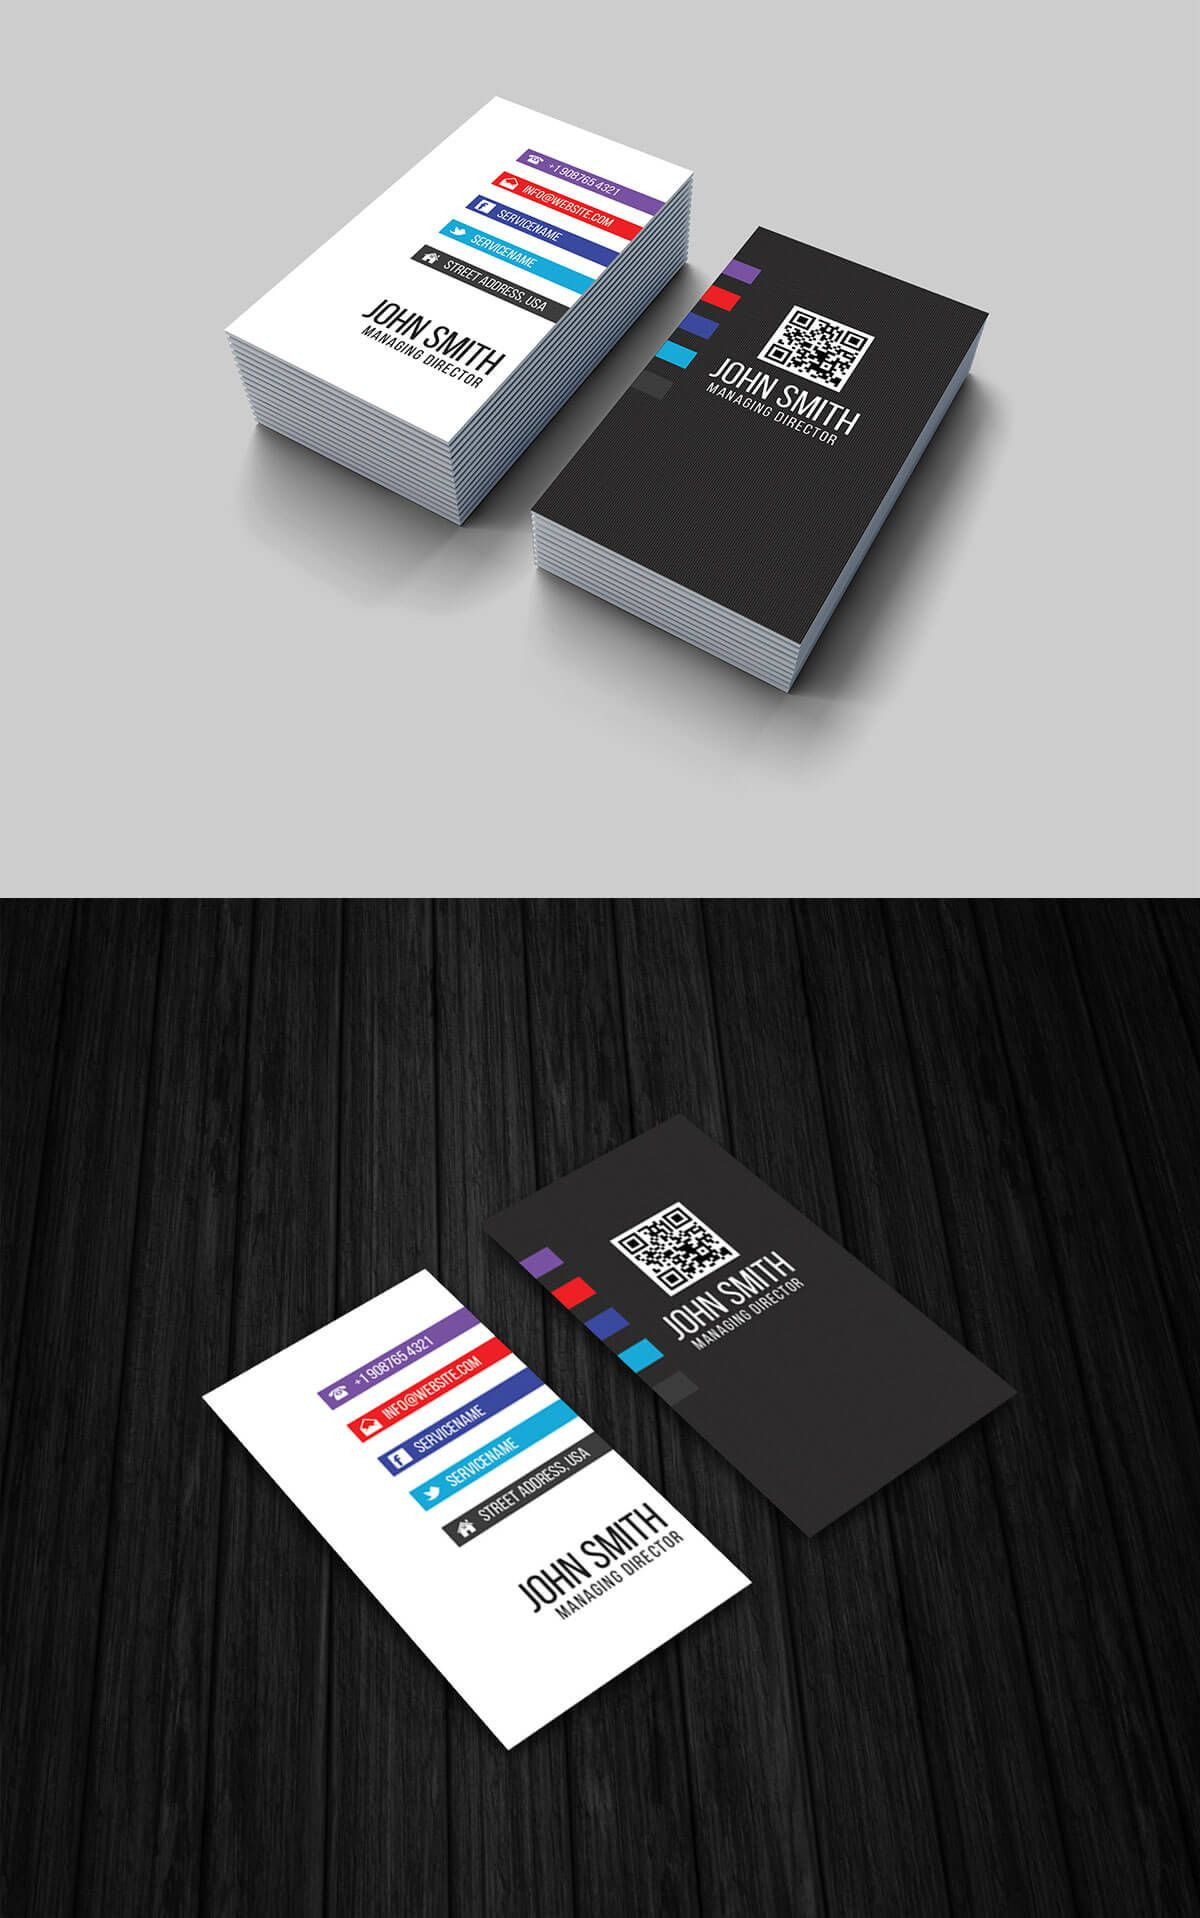 Vertical Business Card Template Word